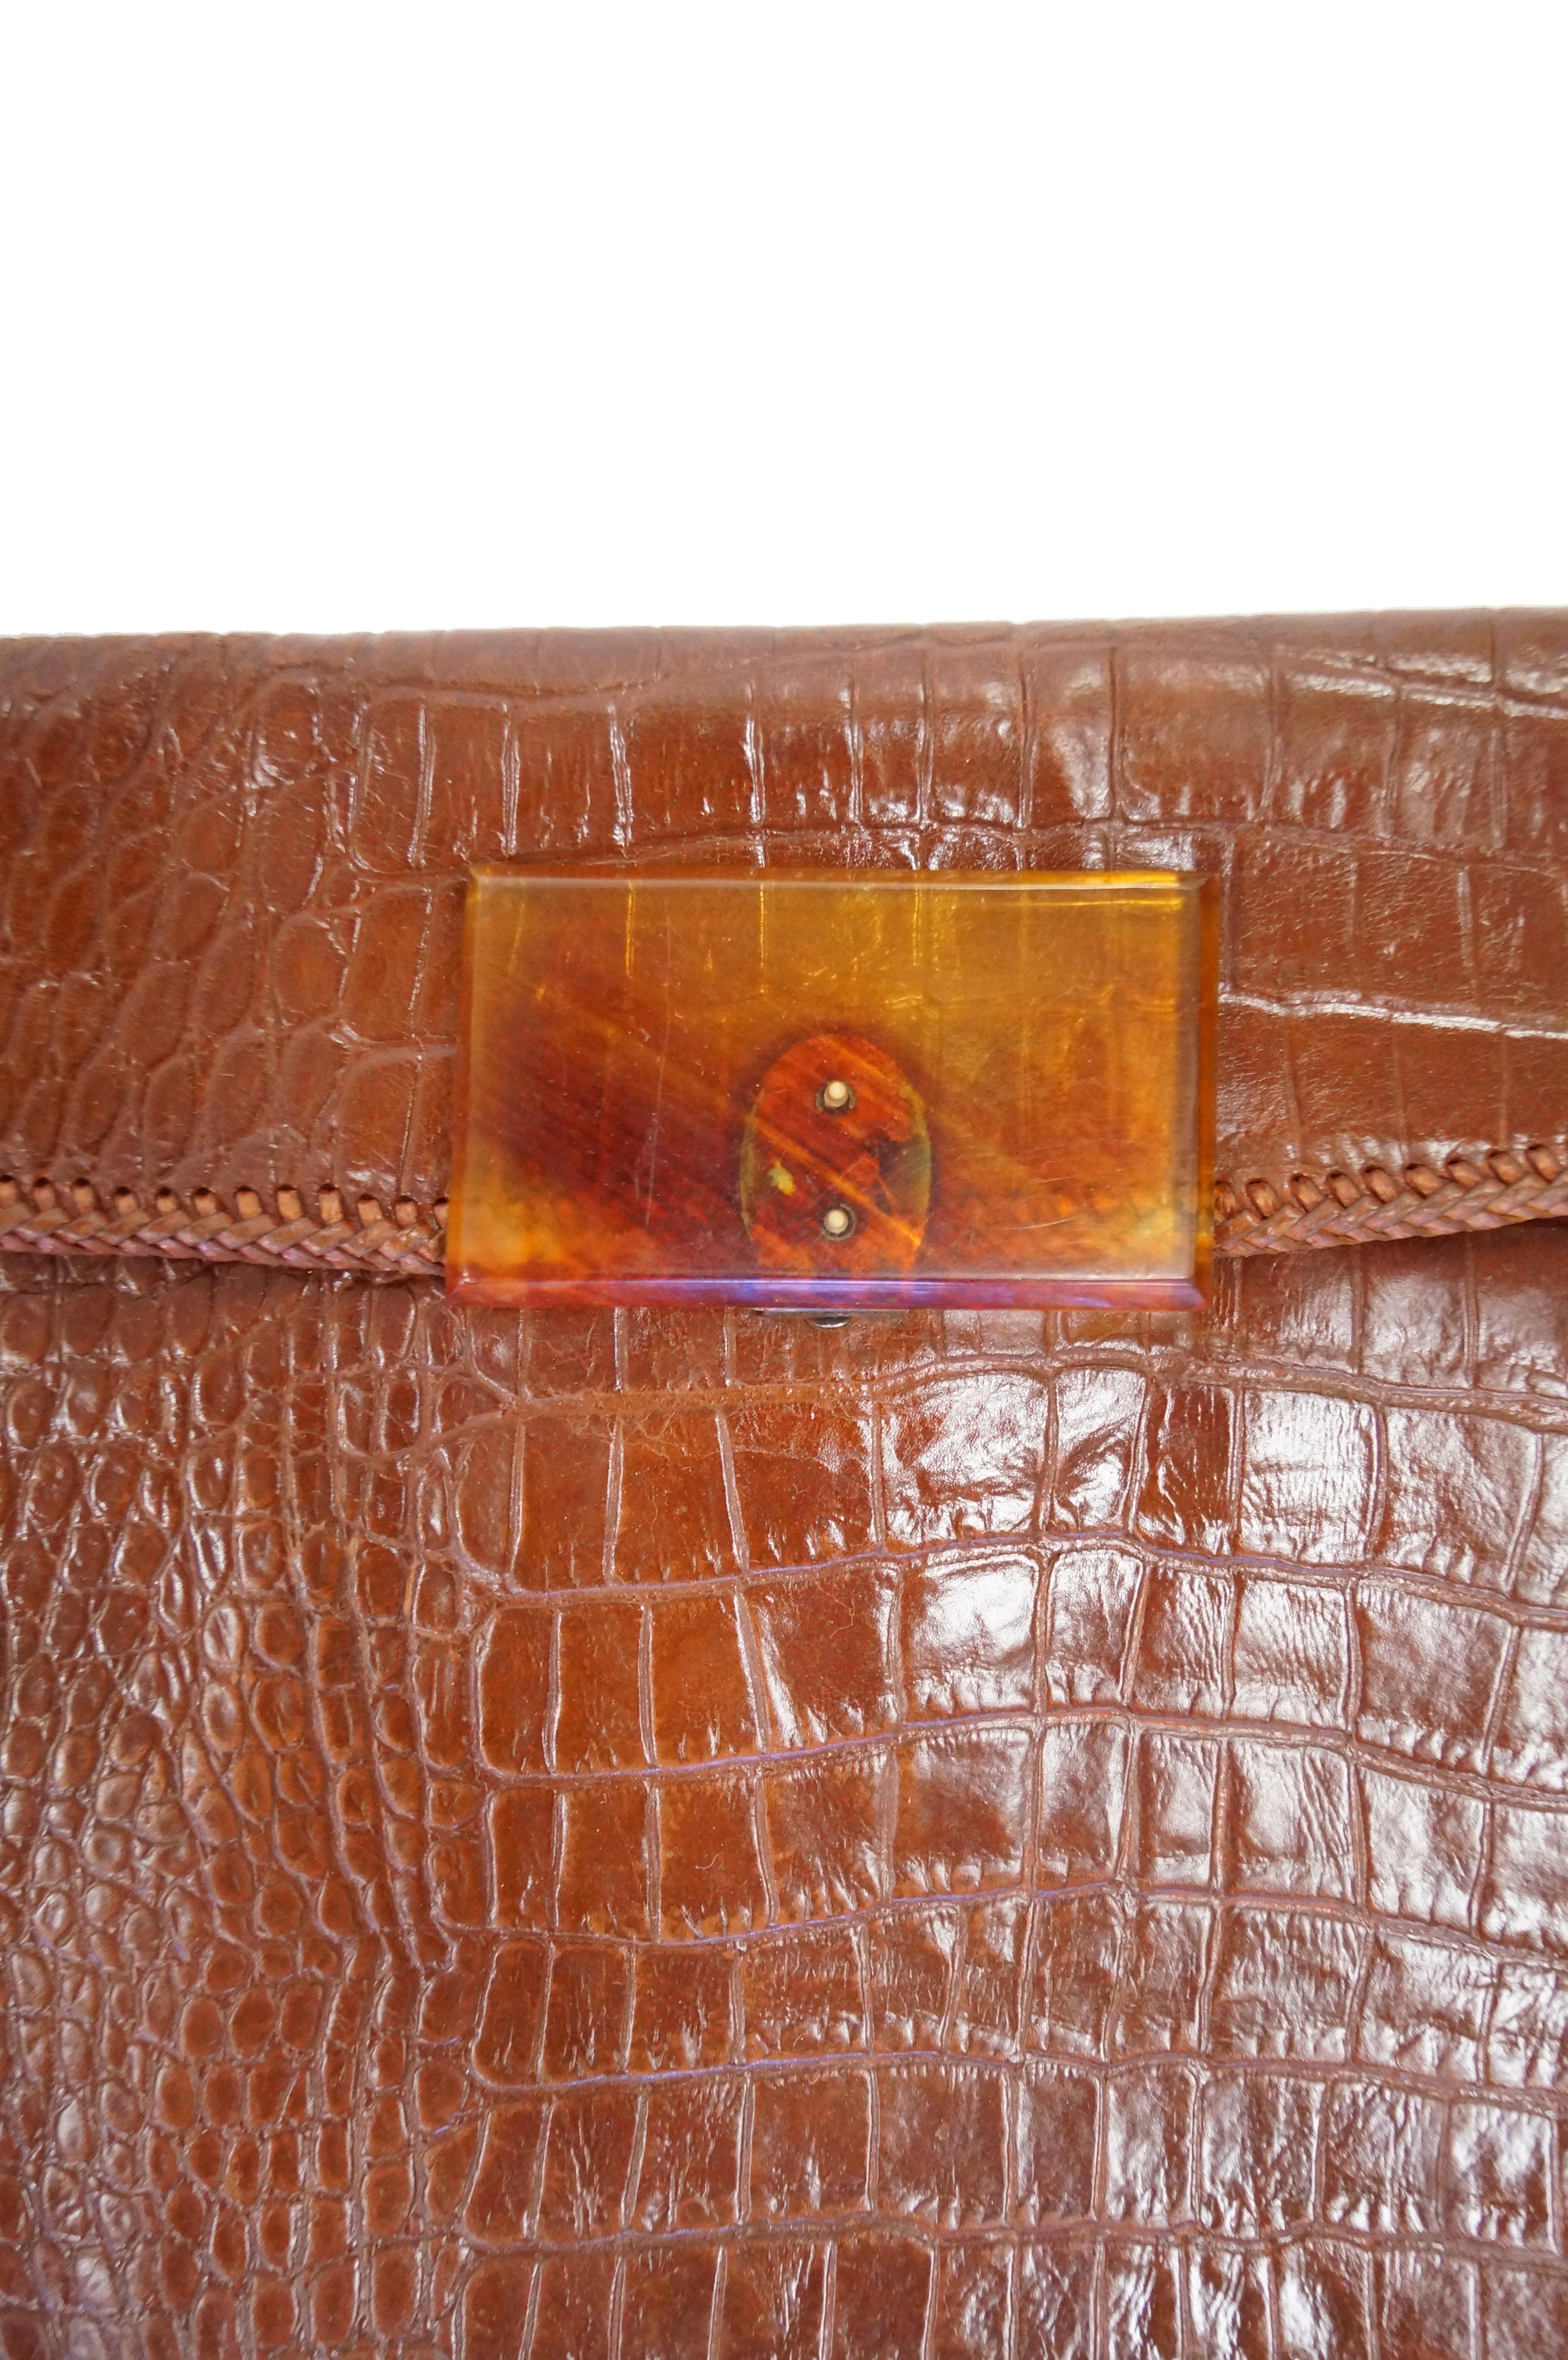 Amazing glossy chestnut brown alligator clutch! This clutch has a trapezoid - like rectangular silhouette, with a protruding flap. The edges of the alligator skin are held together by braided stitching. Lucite clasp. 

